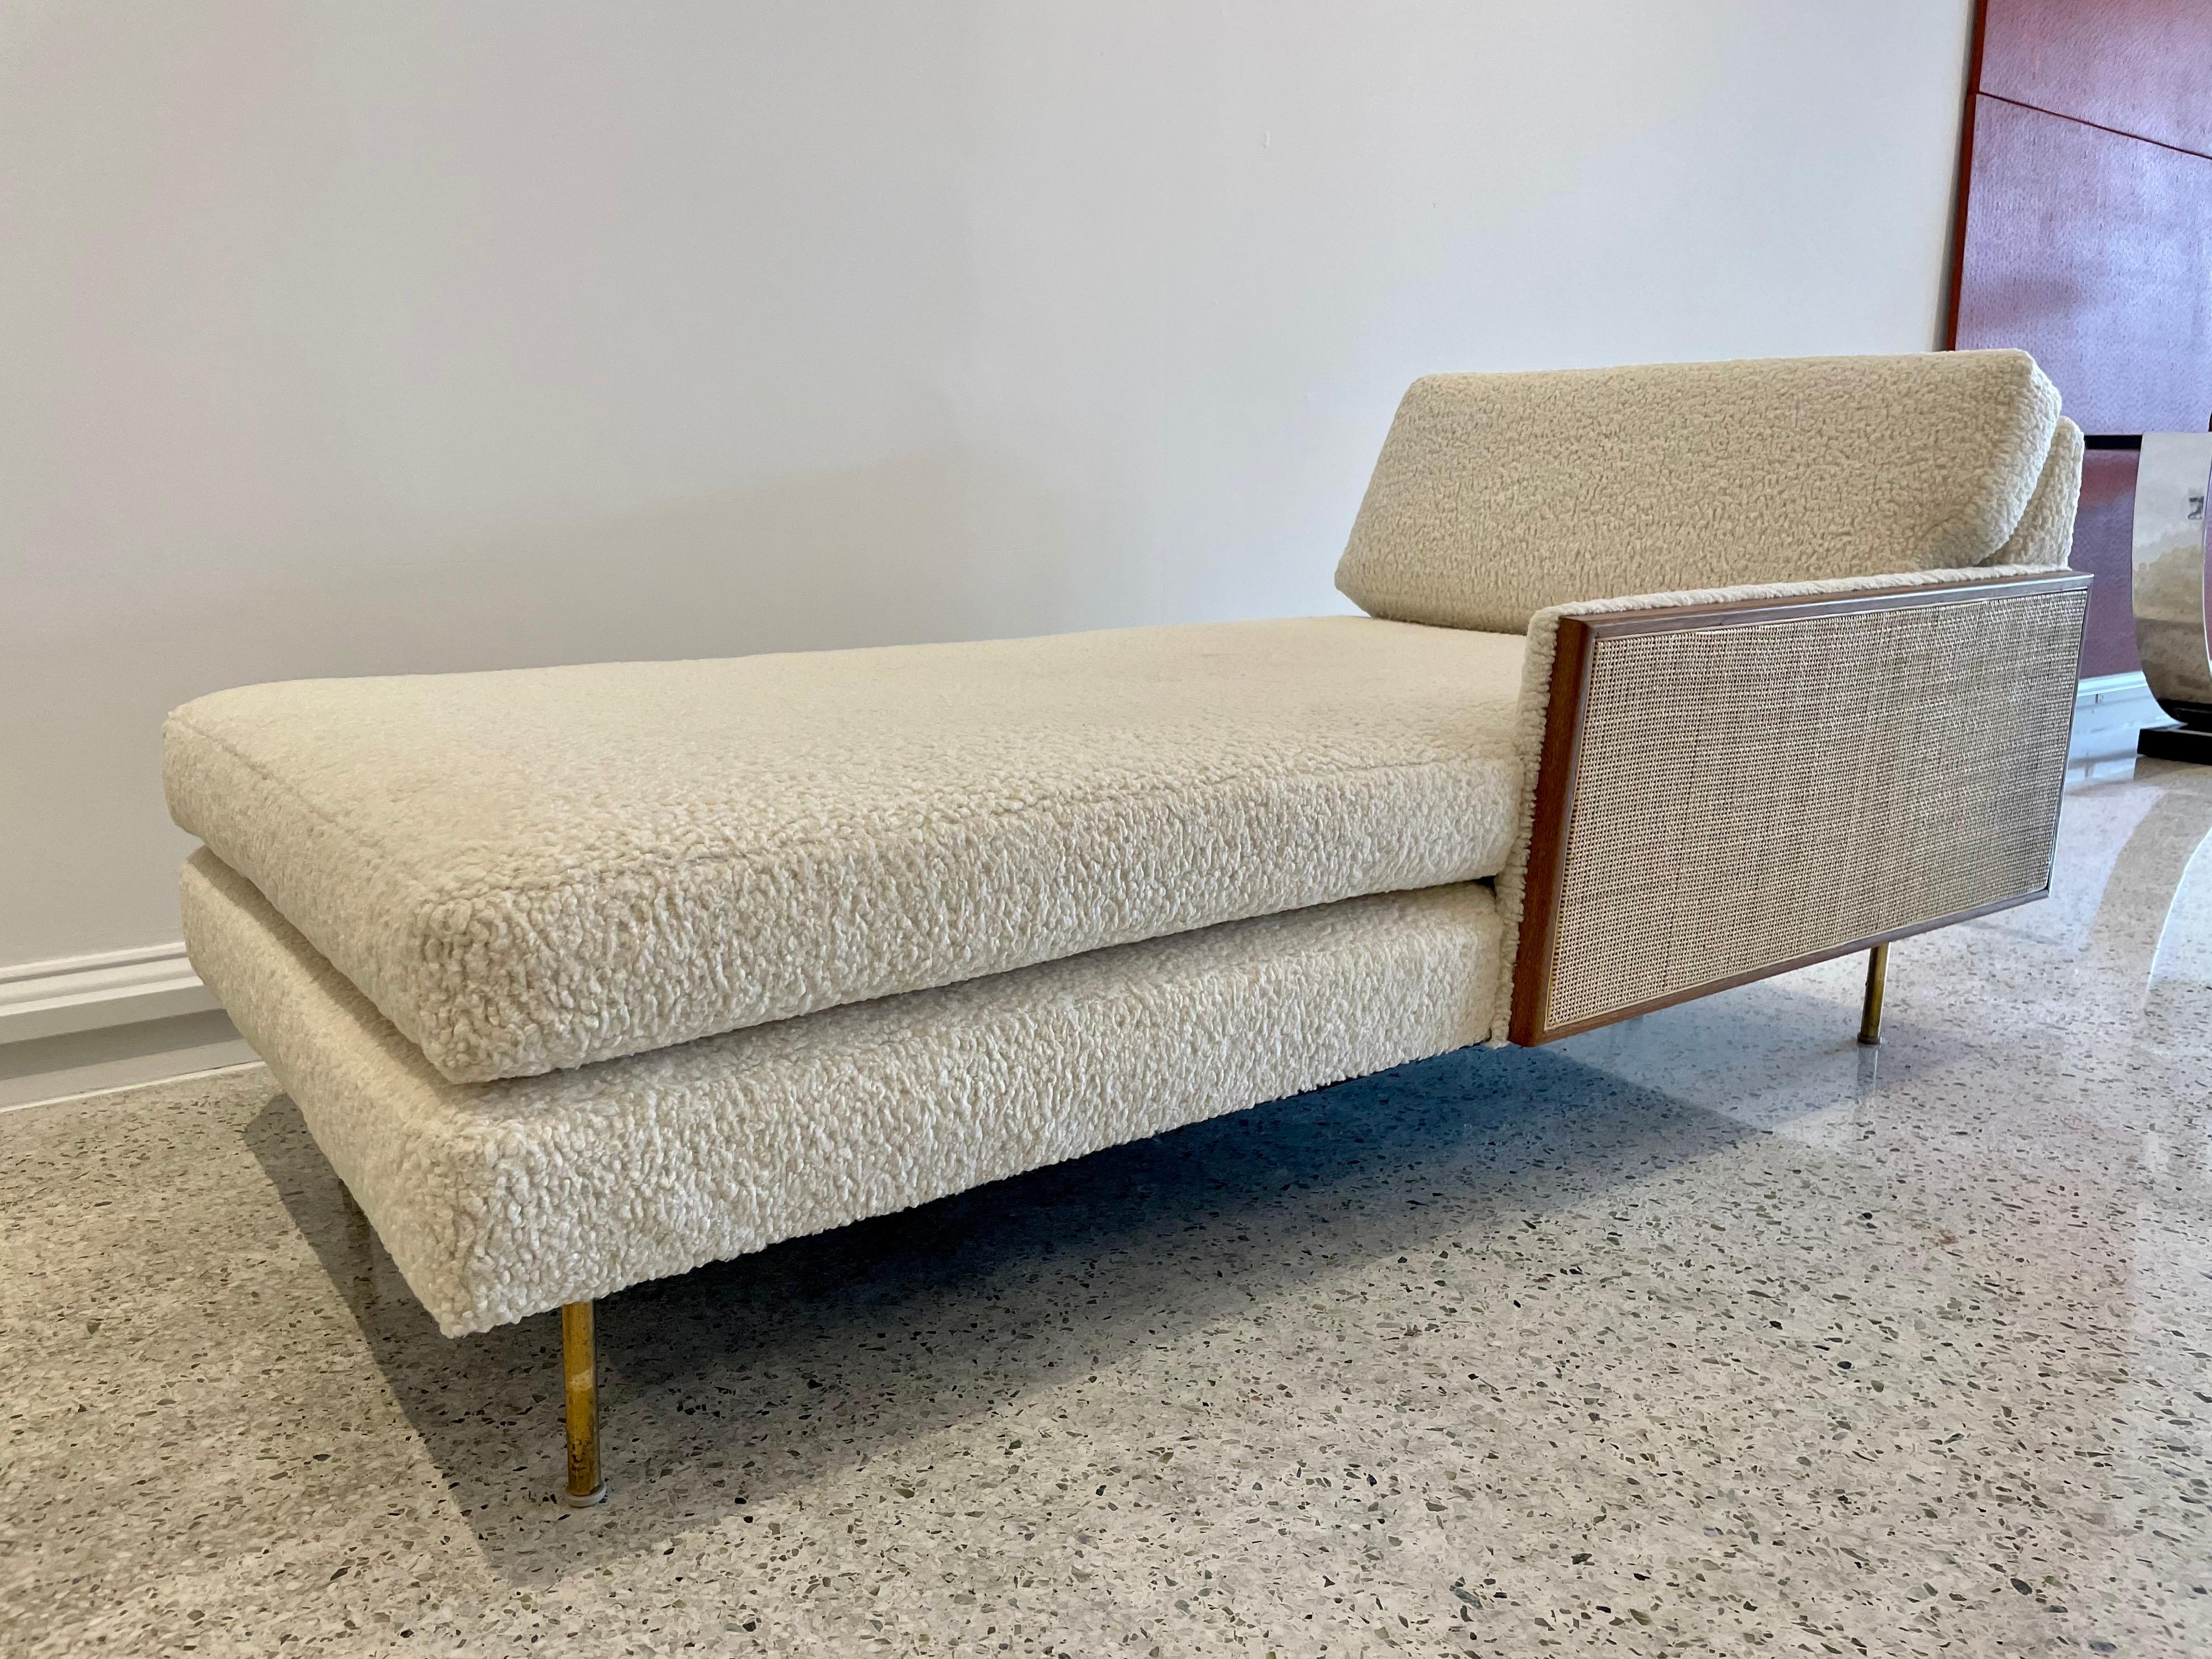 Nubby boucle fabric in natural tone. Fairly clean and lightly used condition. A couple of spots that are minimal. Walnut trimmed cane panel to one side and original brass legs.